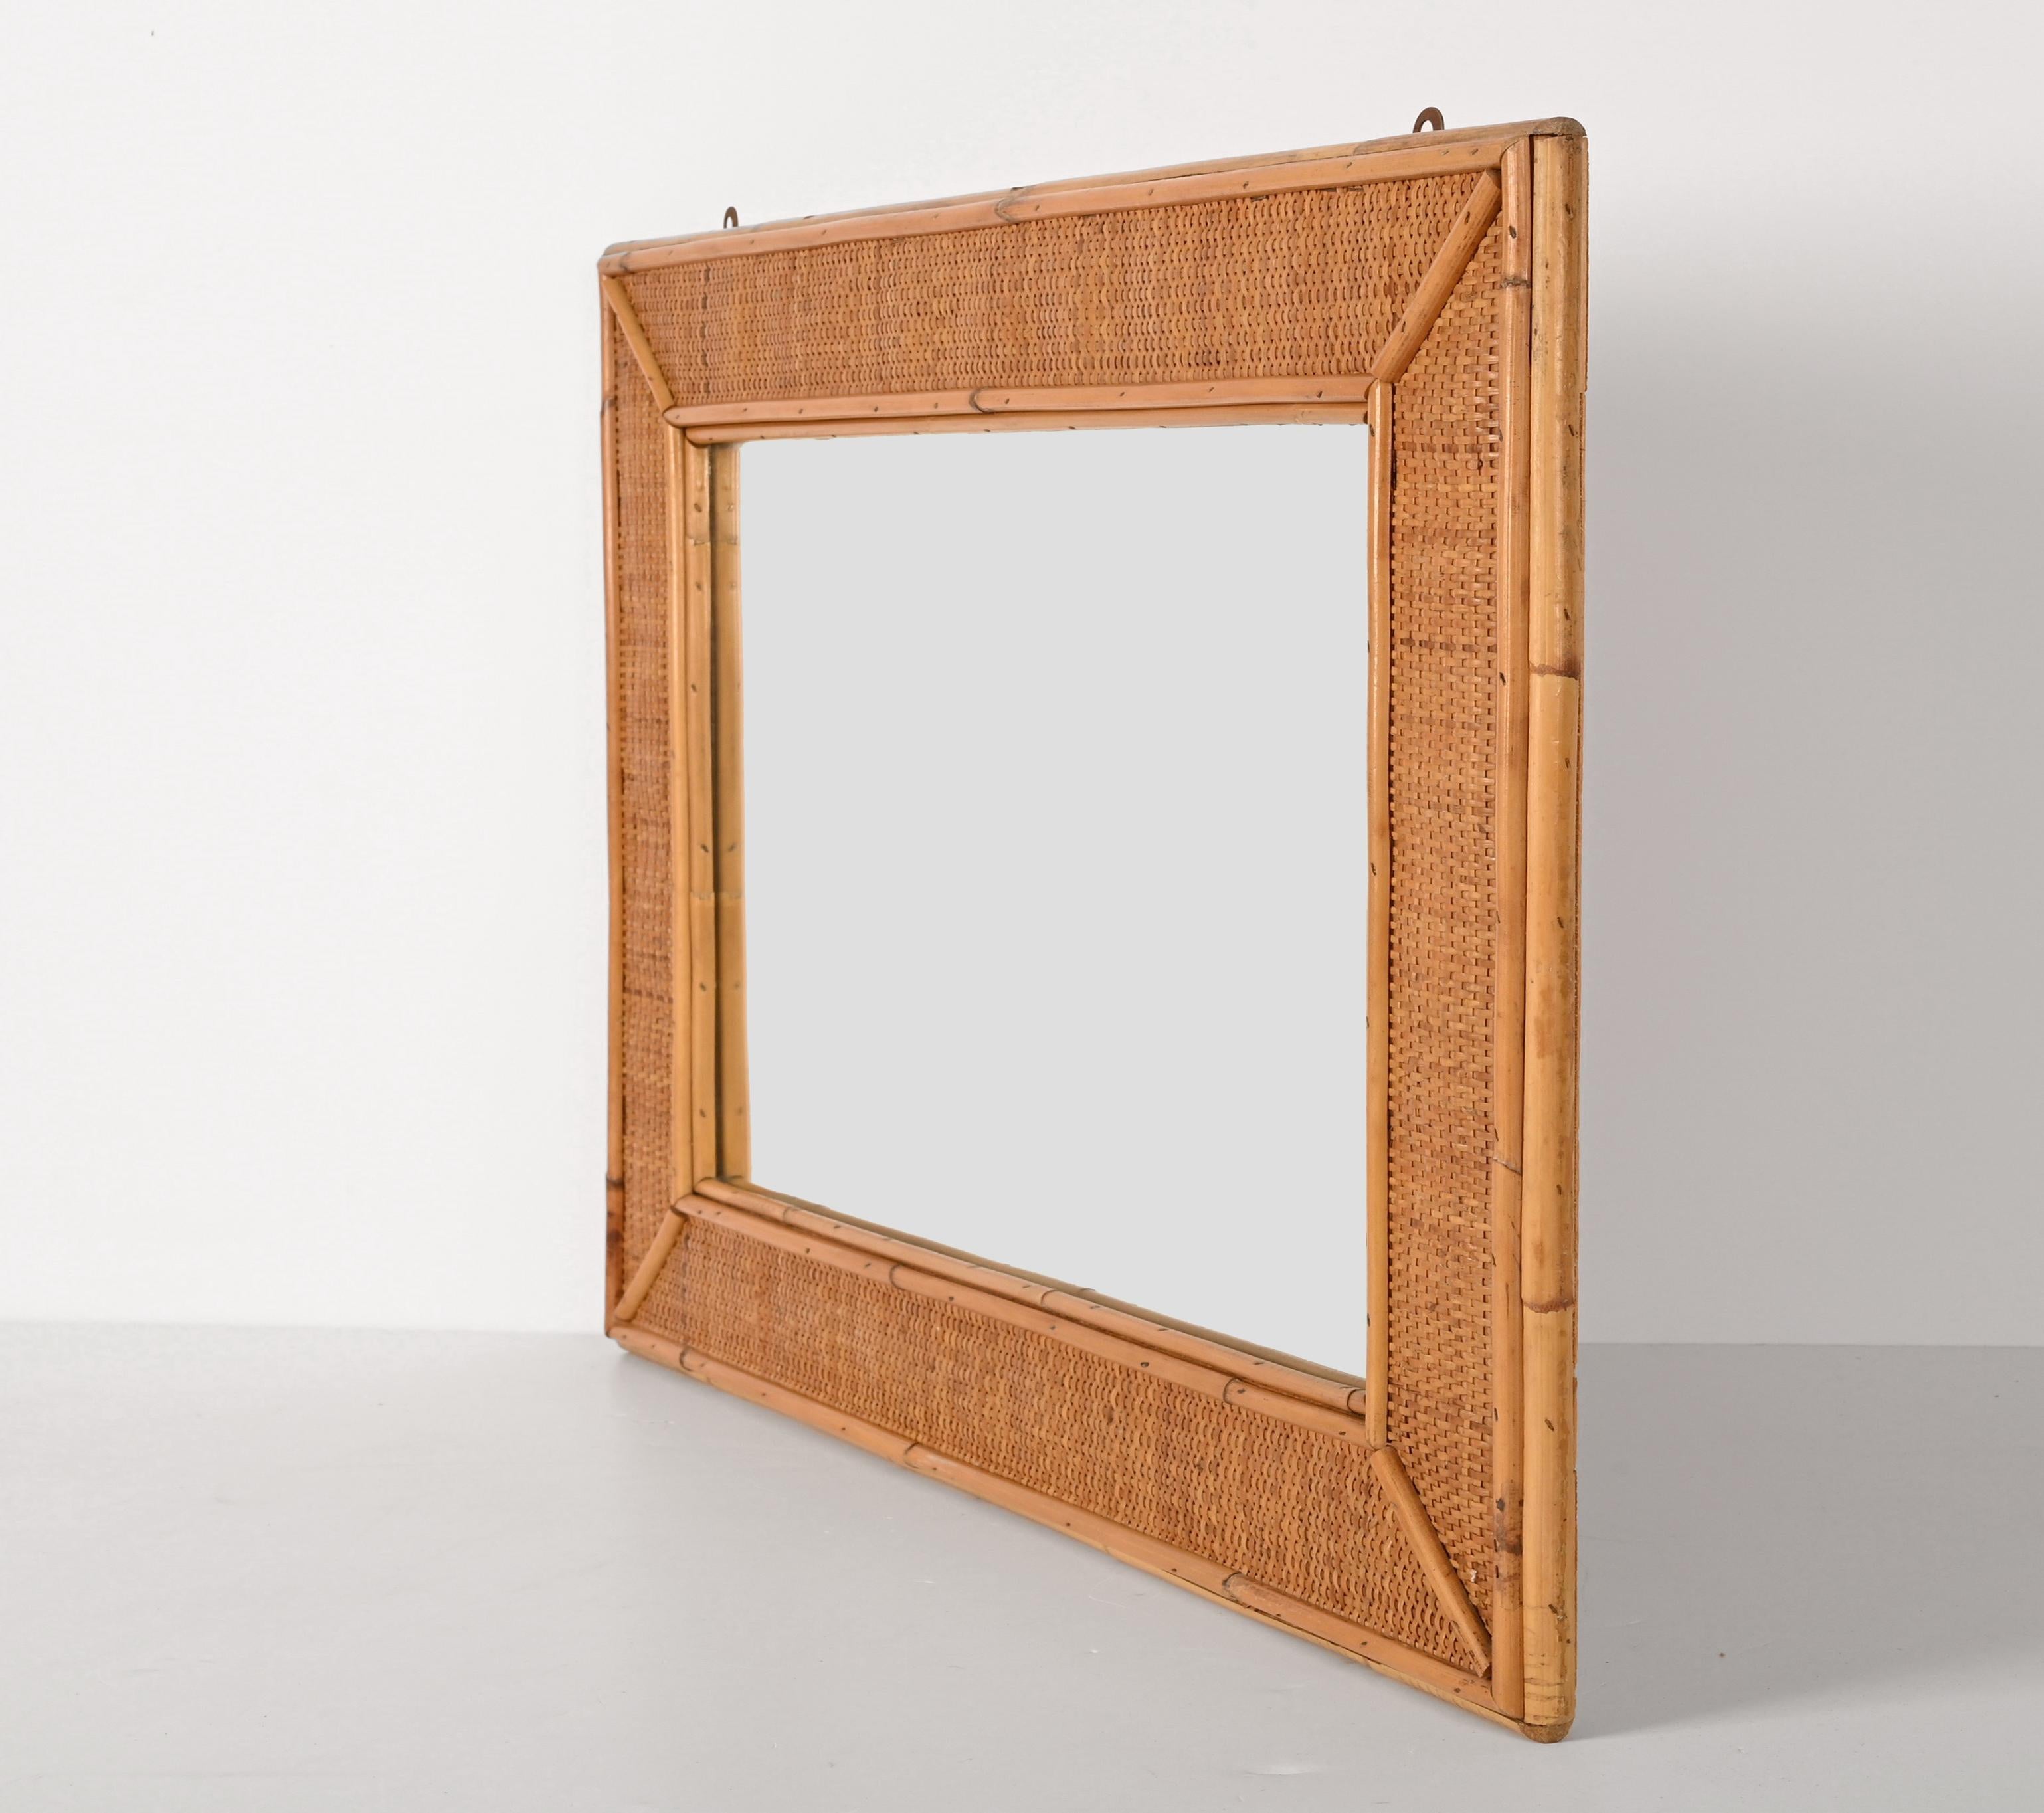 Midcentury Rectangular Italian Mirror with Bamboo and Woven Wicker Frame, 1970s For Sale 7